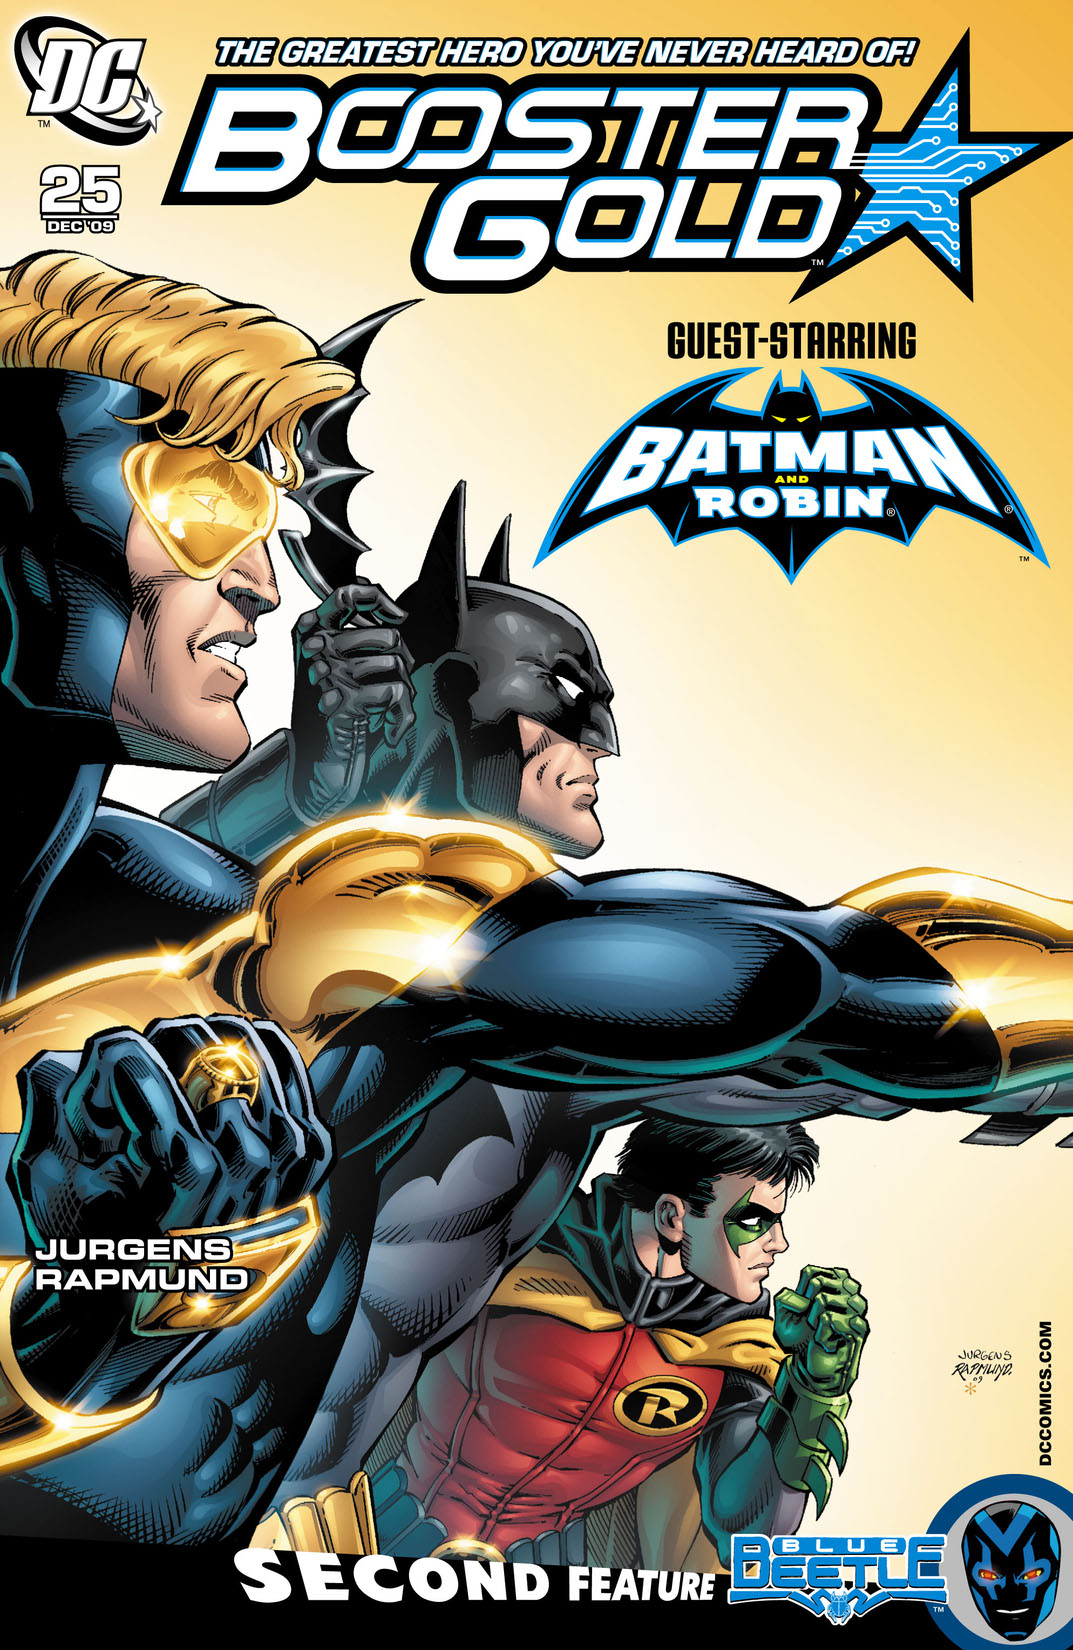 Booster Gold (2007-) #25 preview images